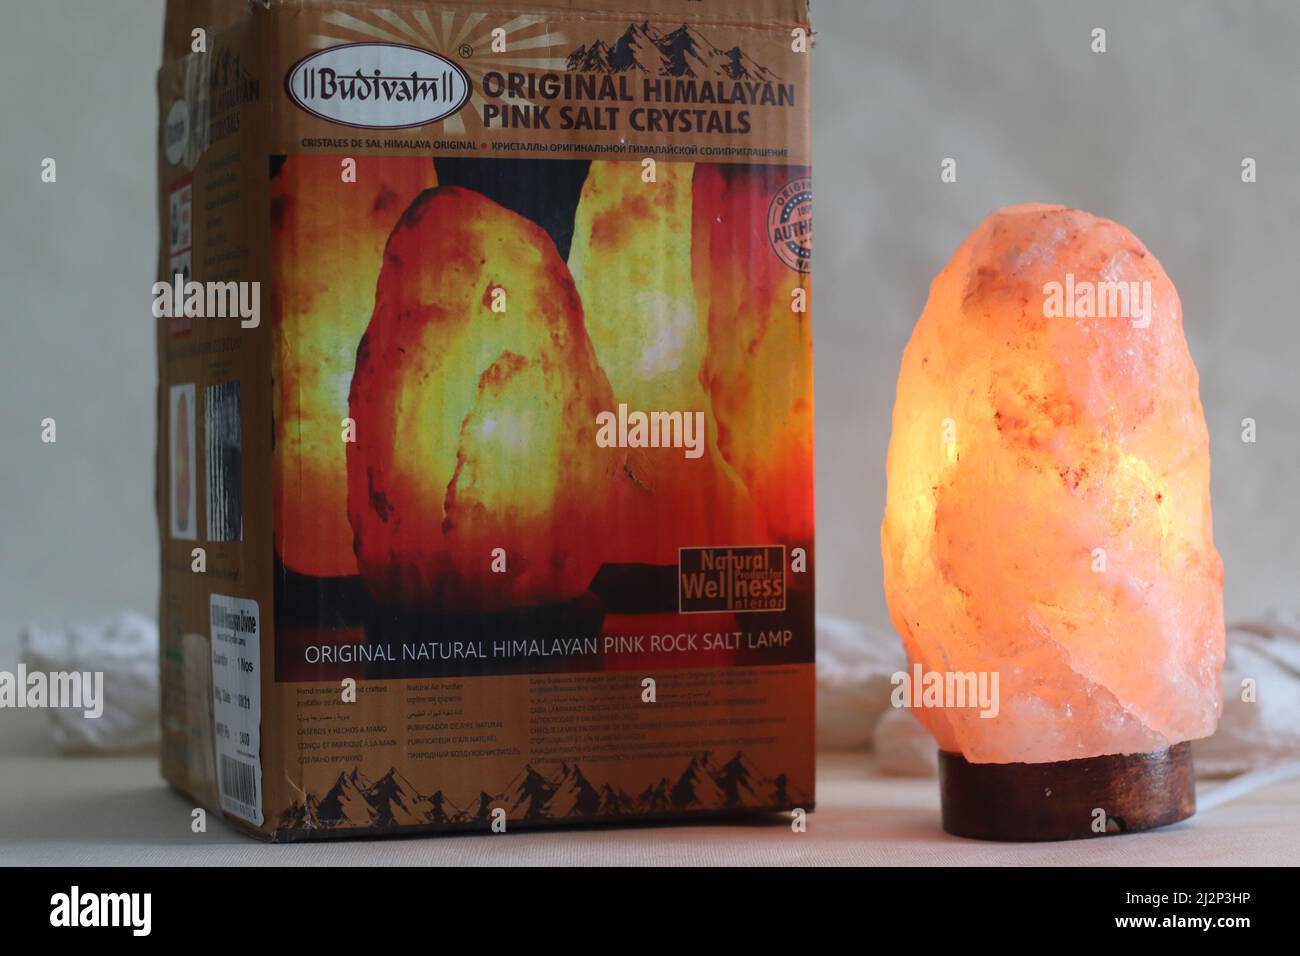 Mumbai, Maharashtra, India, March 16 2022: Budivam original Himalayan pink salt crystal lamp. Lamp handcrafted with rare crystals which are 250 millio Stock Photo